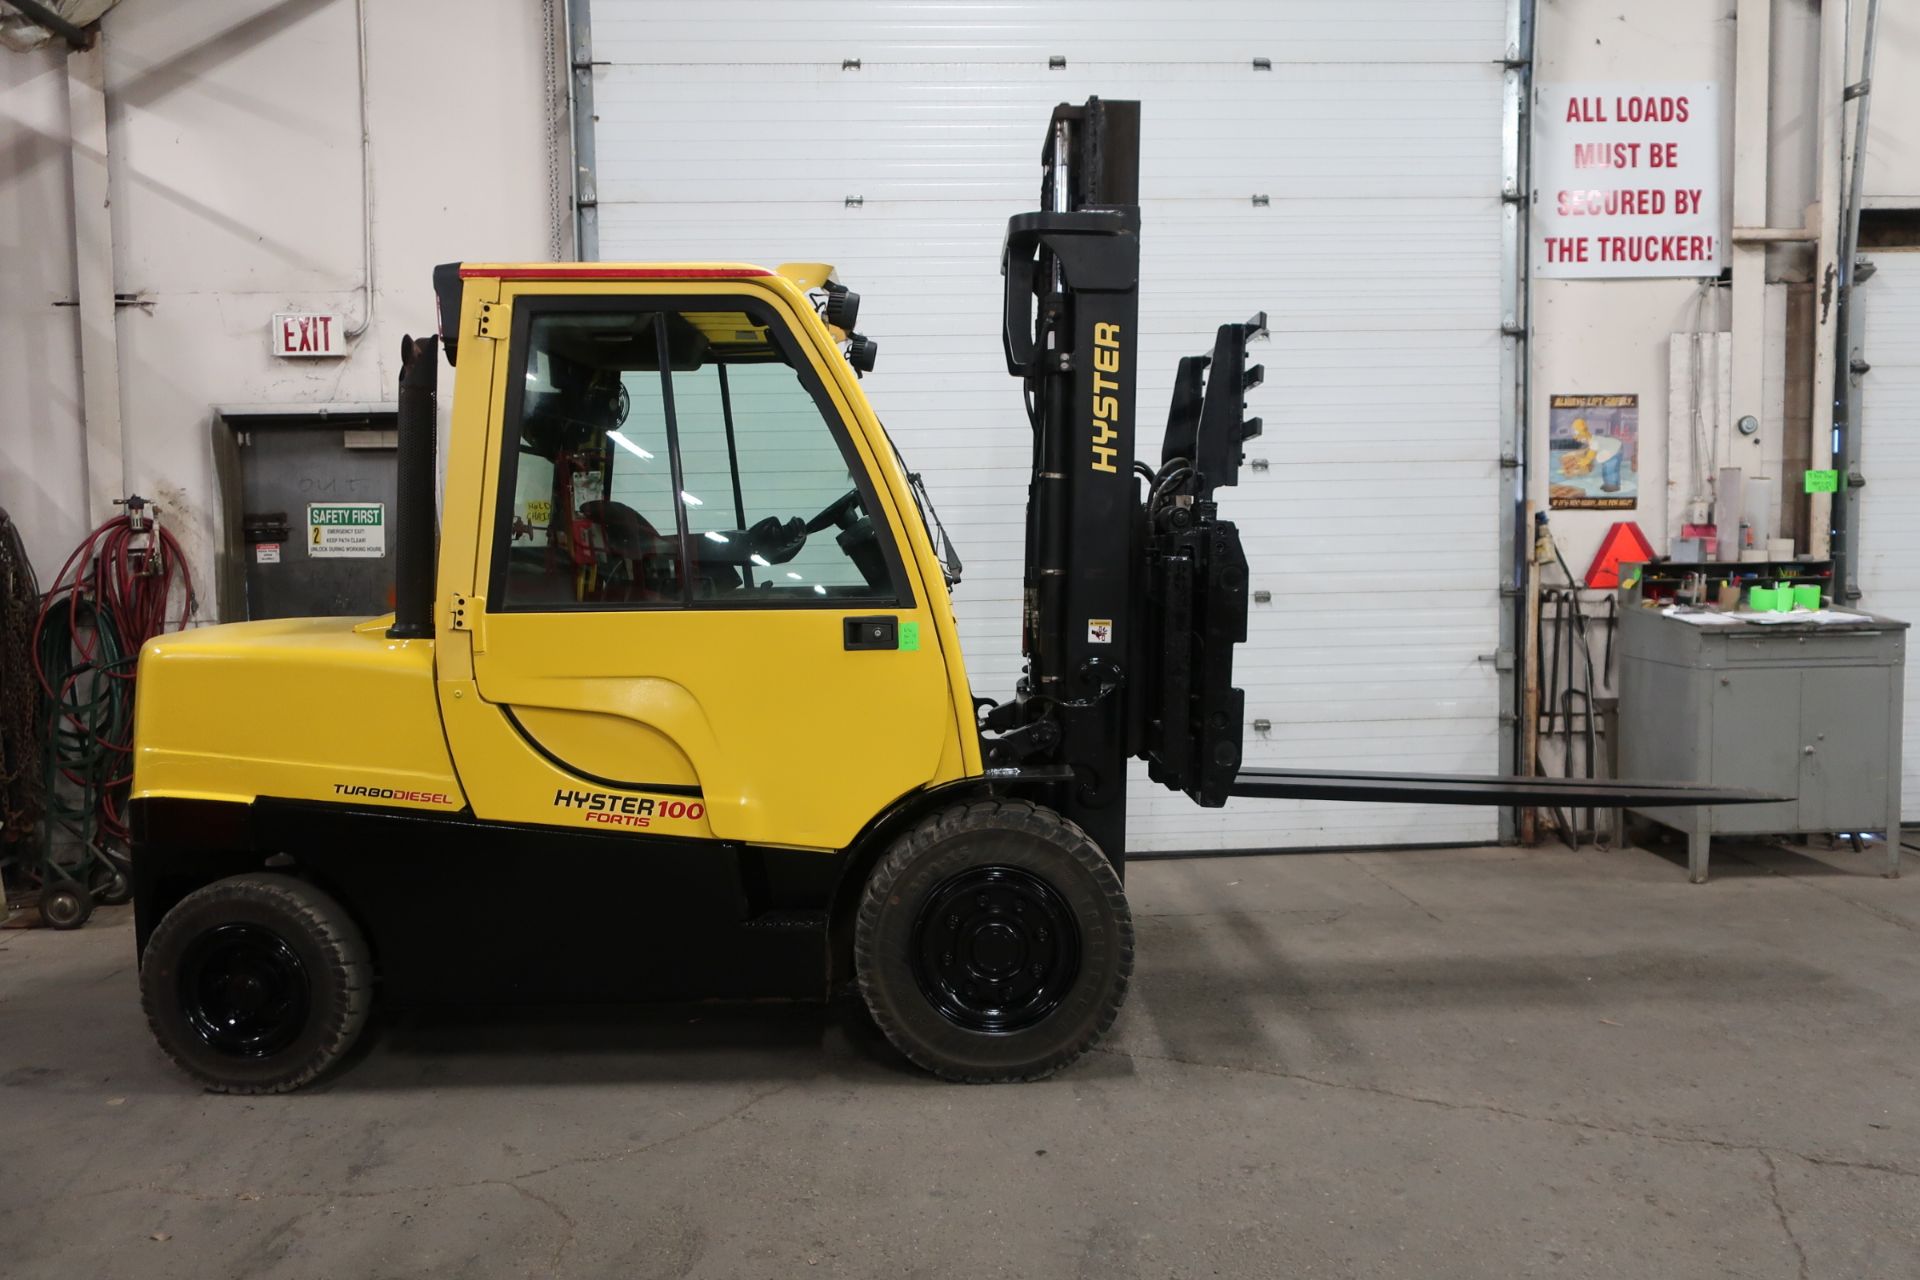 FREE CUSTOMS - 2013 Hyster 10000lbs Capacity OUTDOOR Forklift with Sideshift and Fork Positioner